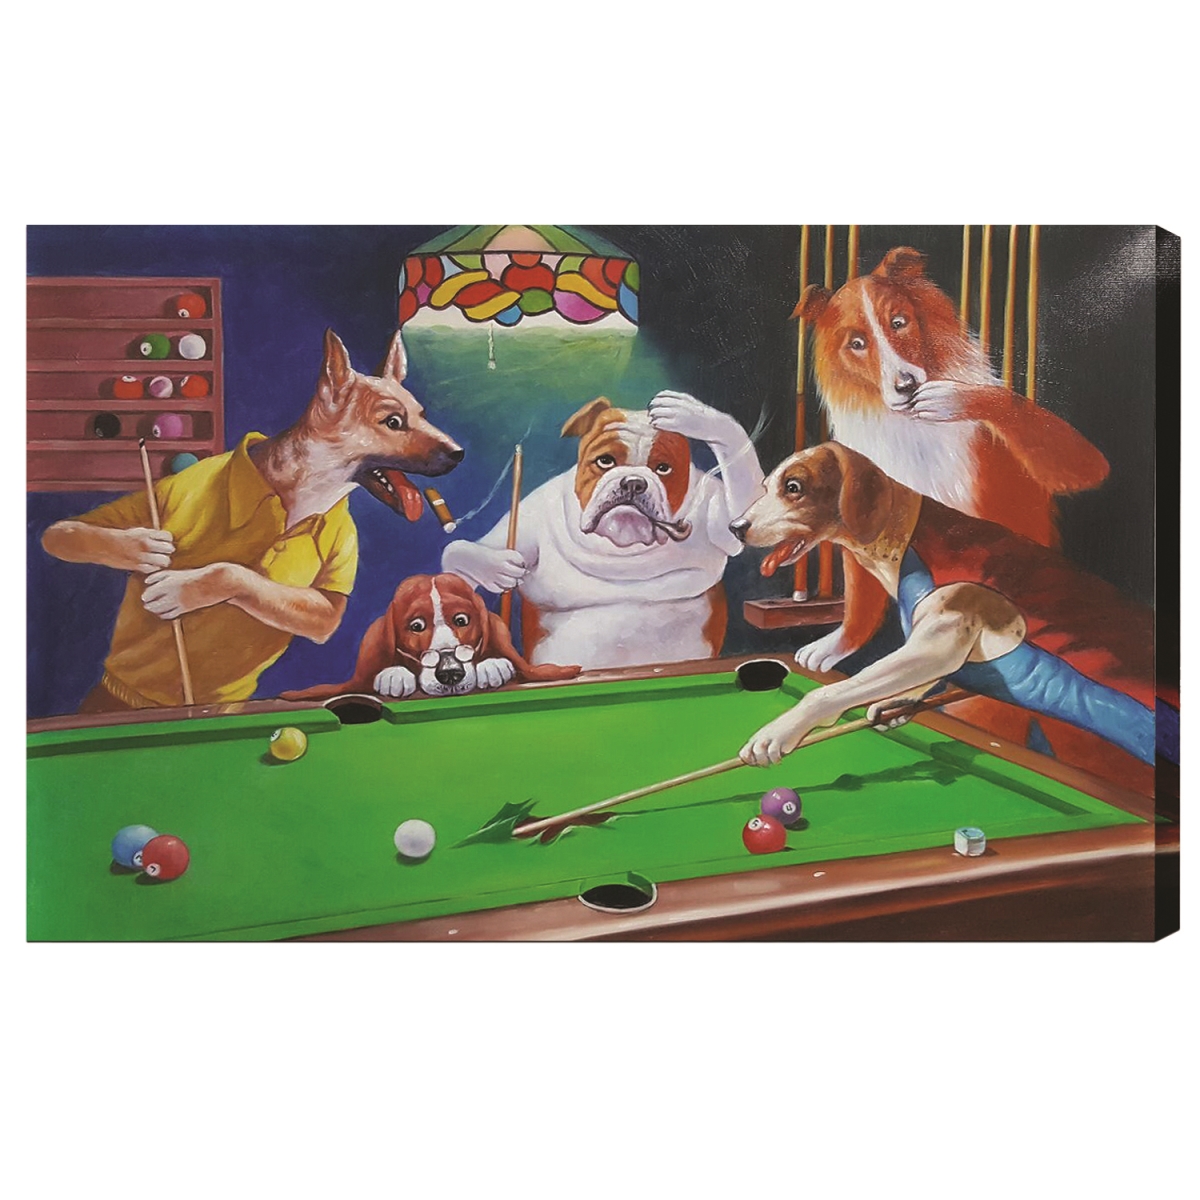 Picture of RAM Game Room OP8 36 x 24 in. Jack The Ripper Oil Painting on Canvas